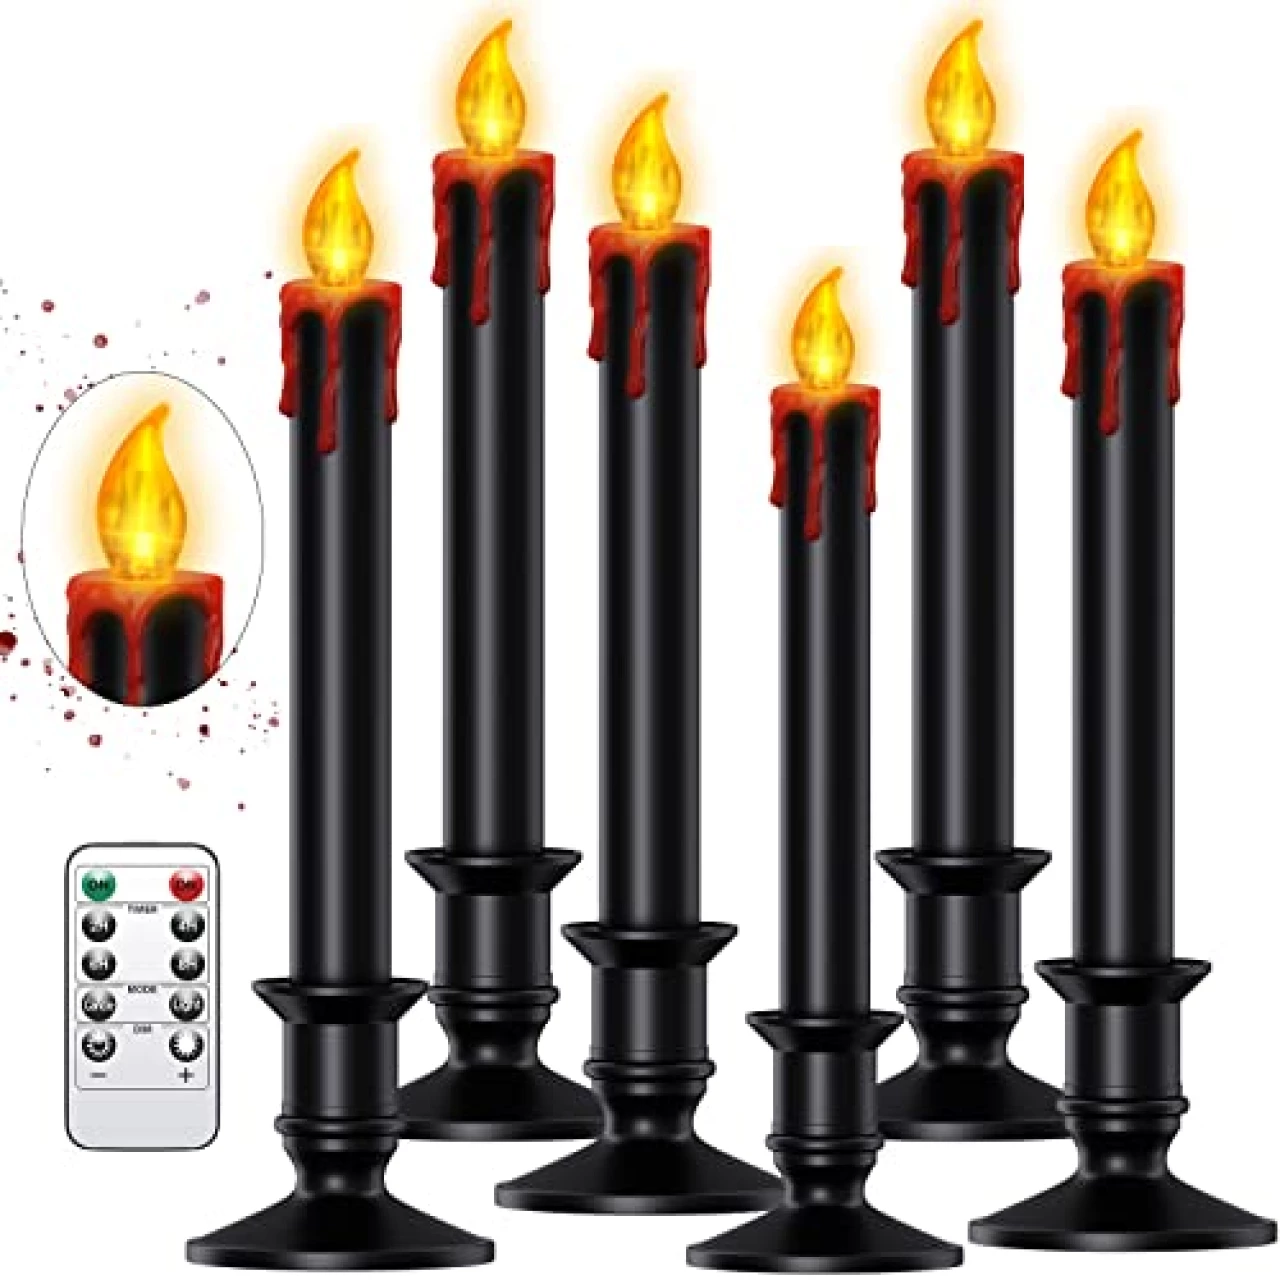 Halloween Candles Bleeding Dripping Black Flameless Candles Halloween Lights Vampire Tears Black Candles with Bases Sucker Window Floating Decor Remote